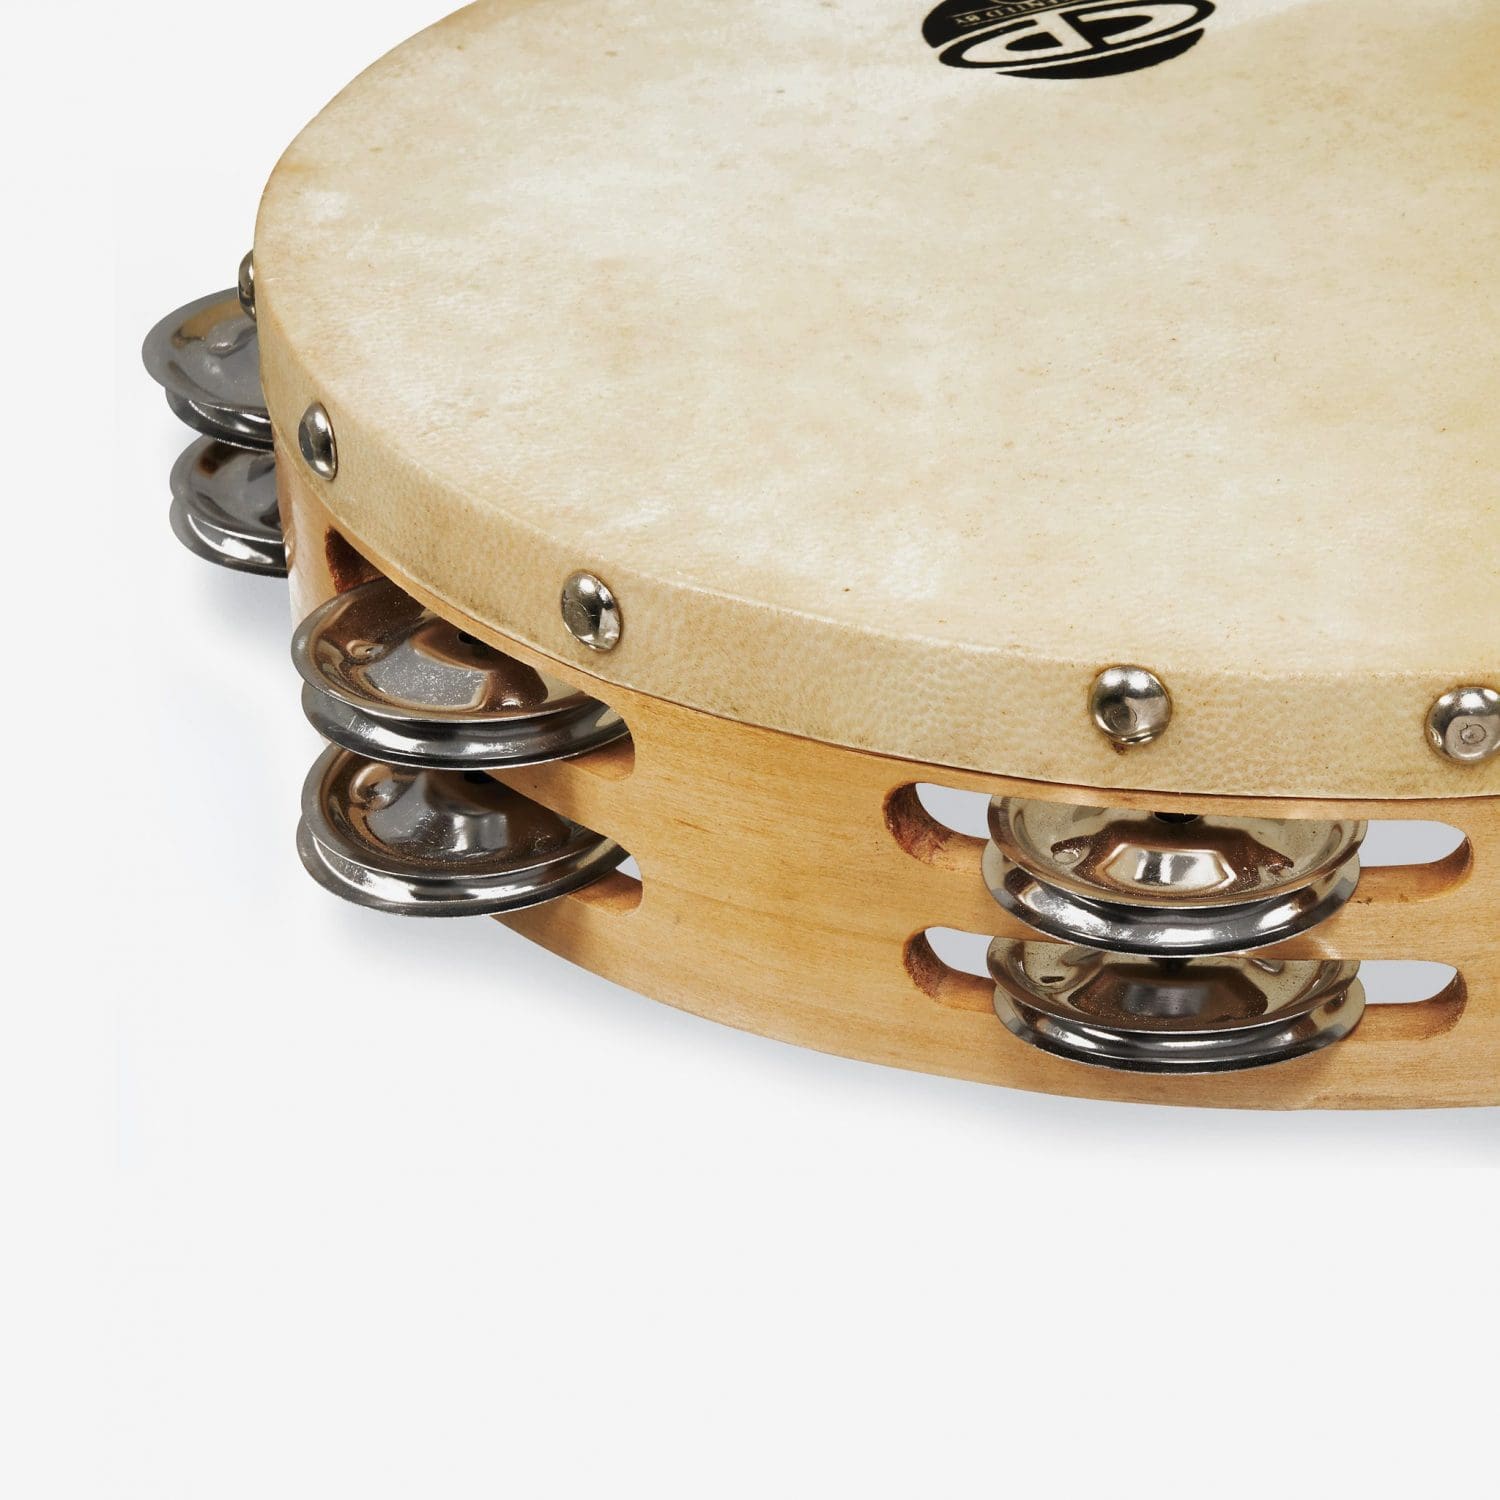 CP Double Row Tambourine with Head